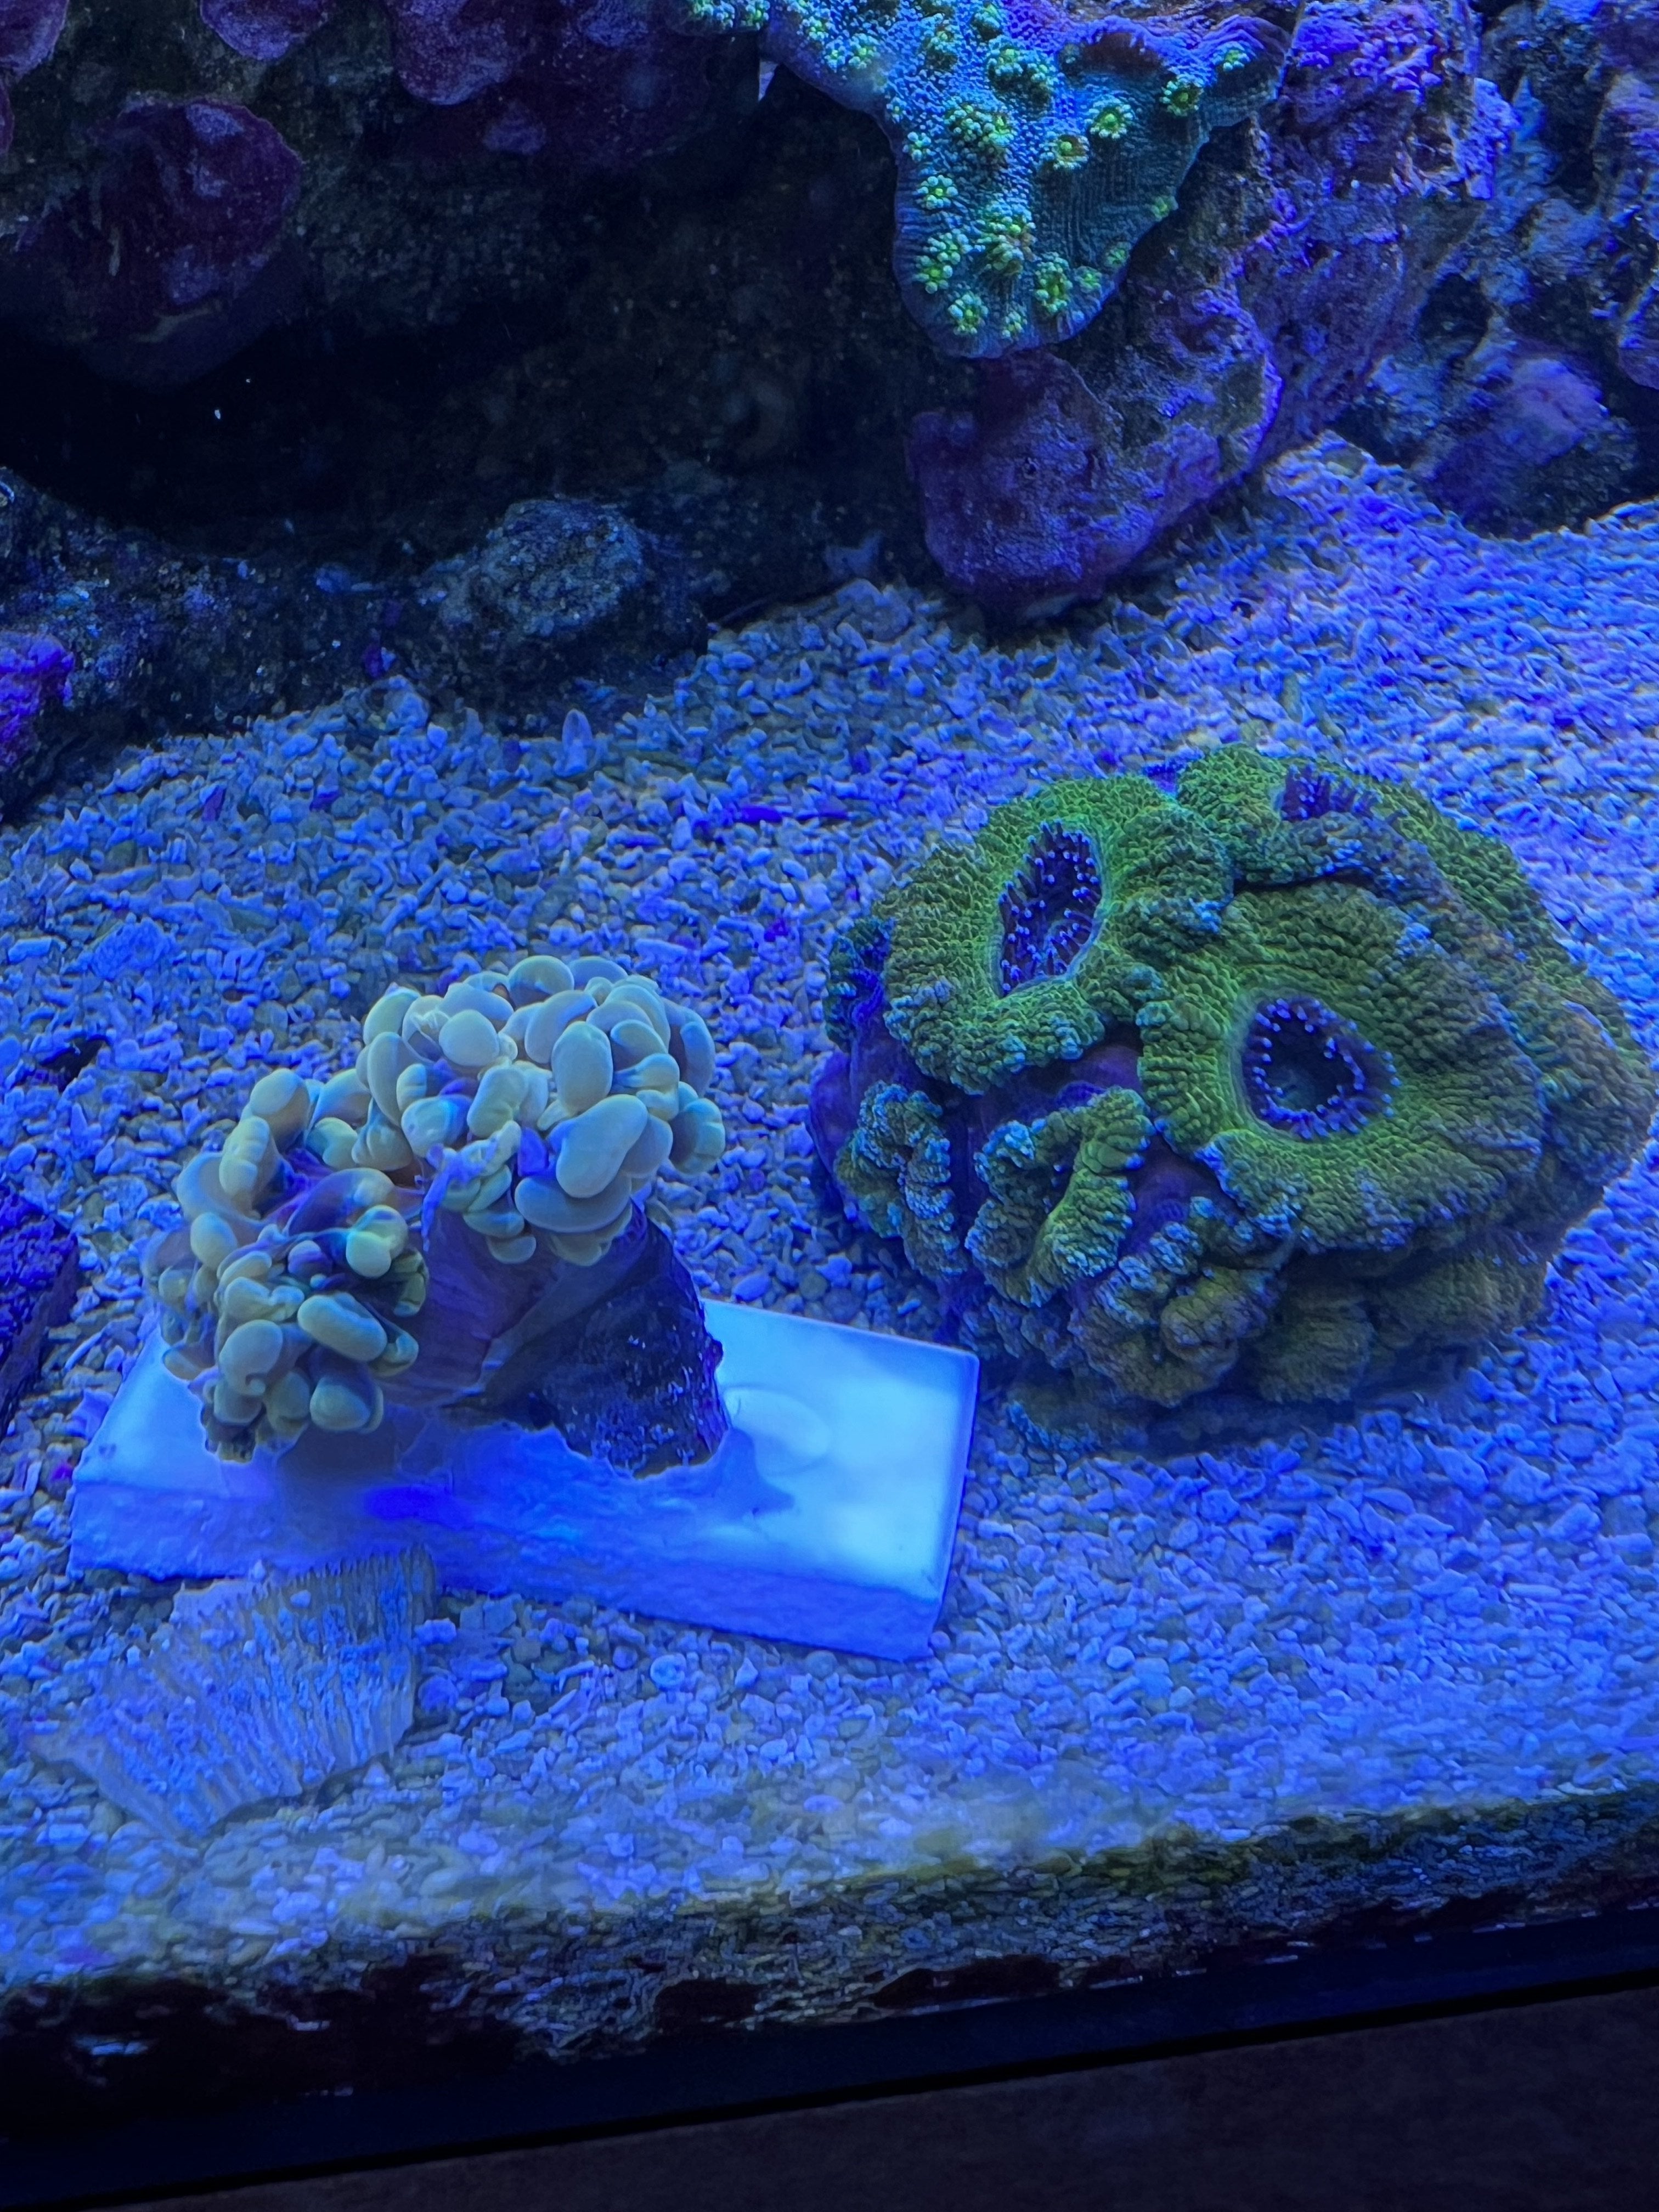 Gold/Rainbow Hammer and Large Acan